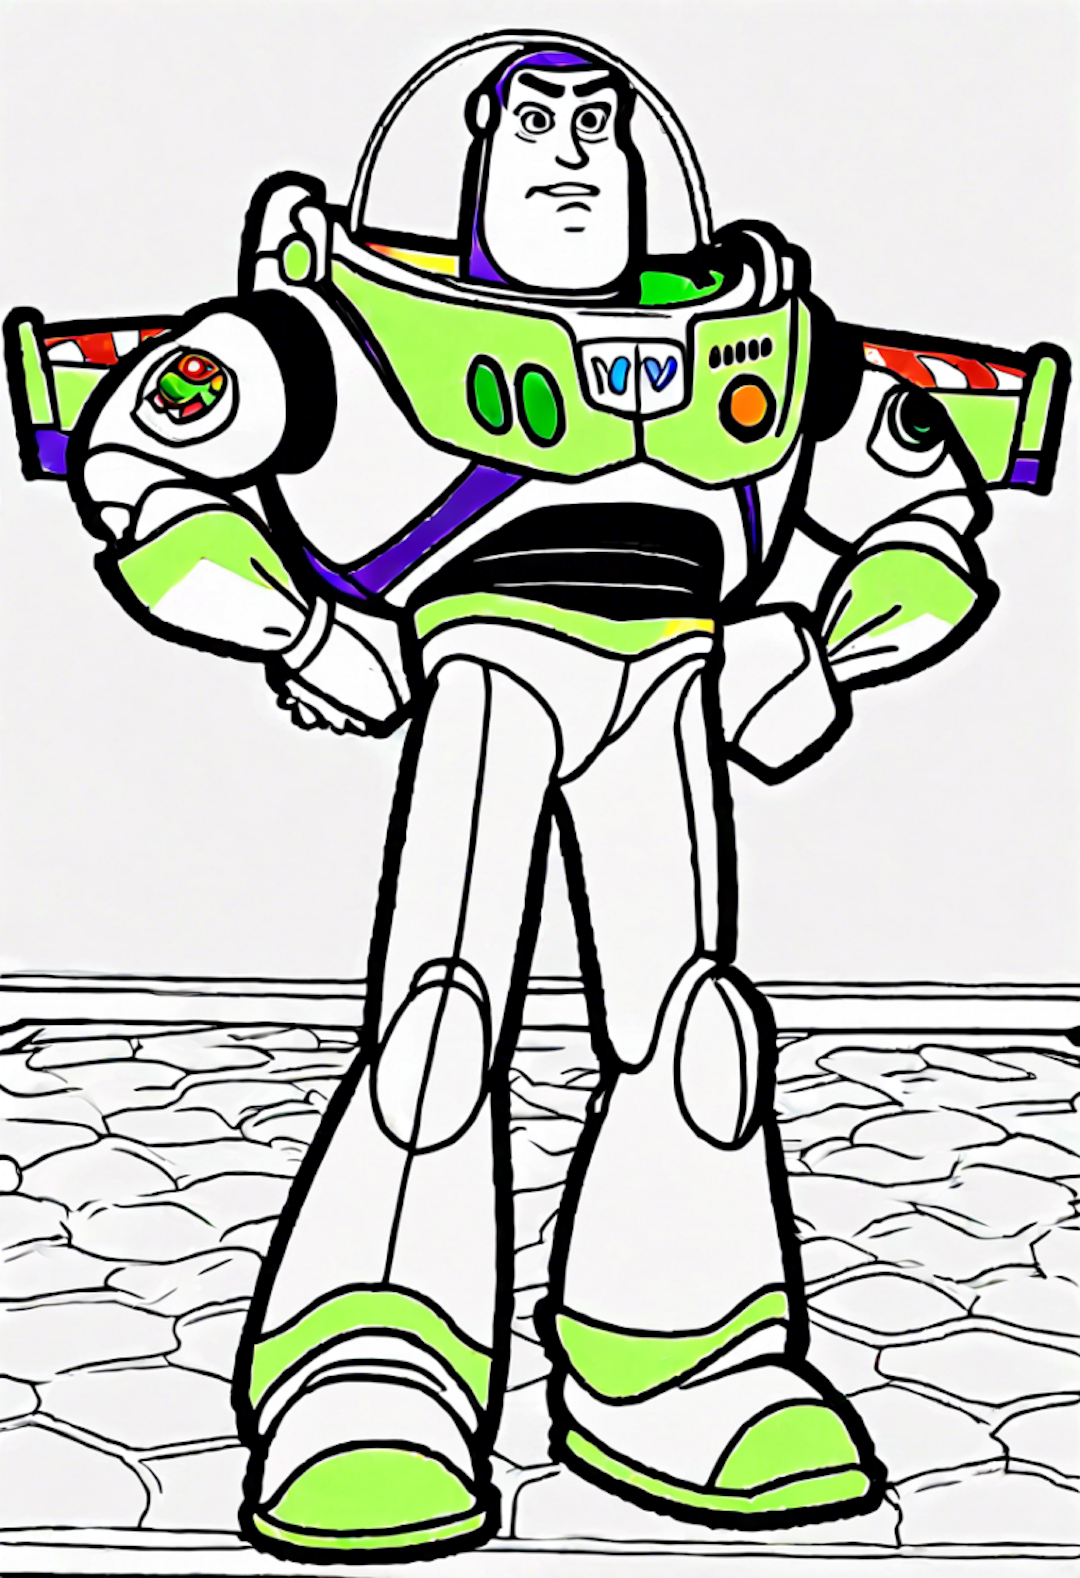 Buzz Lightyear in Action Coloring Page coloring pages